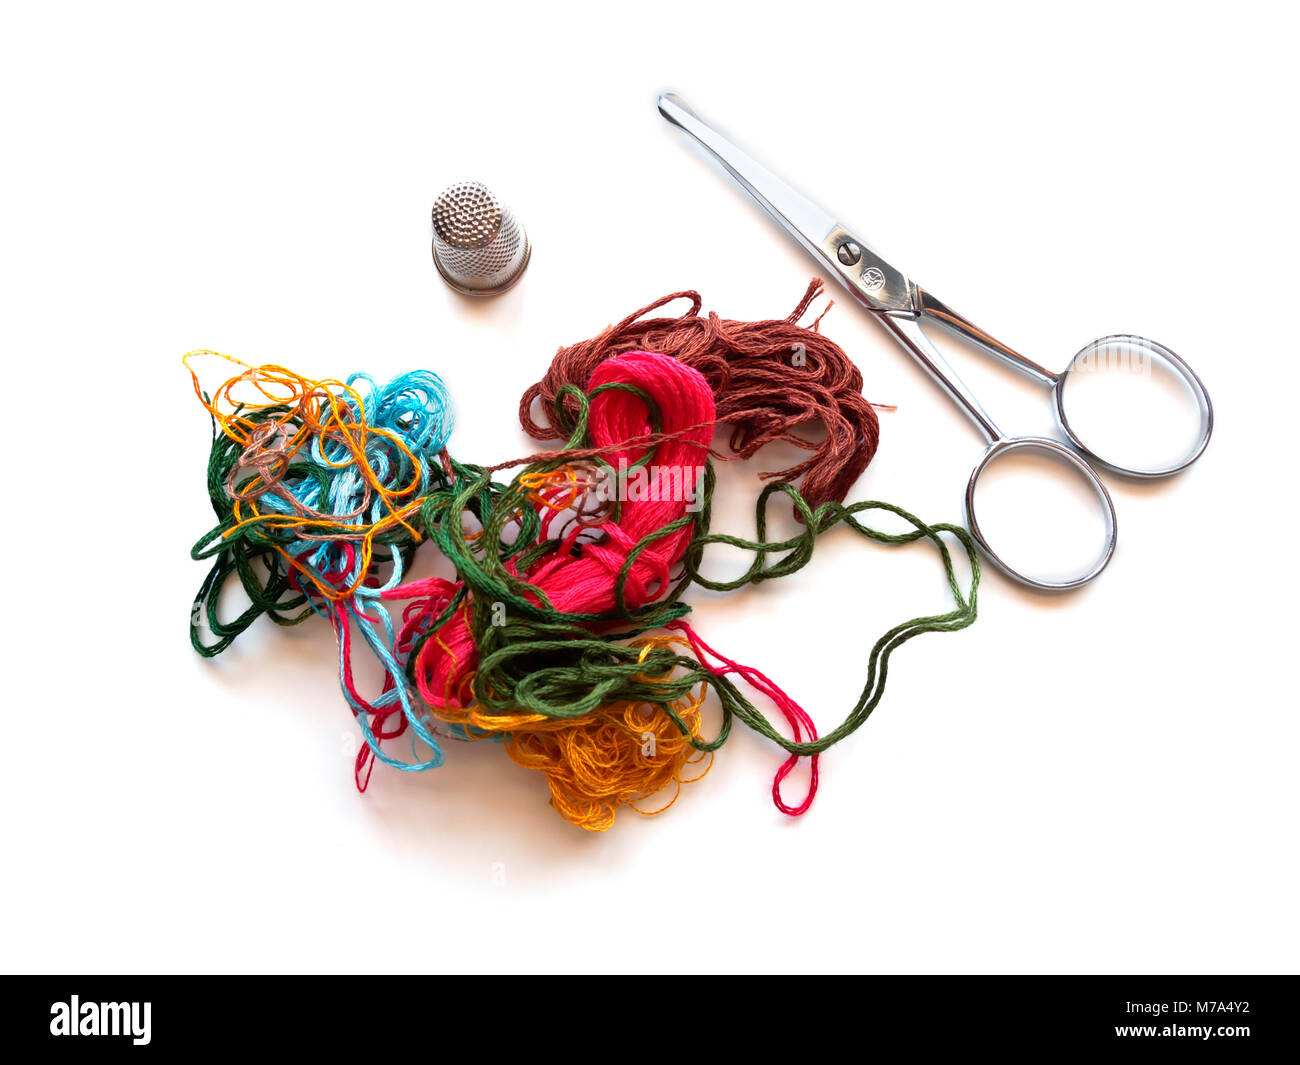 Embroidery thread, scissors and thimble Stock Photo